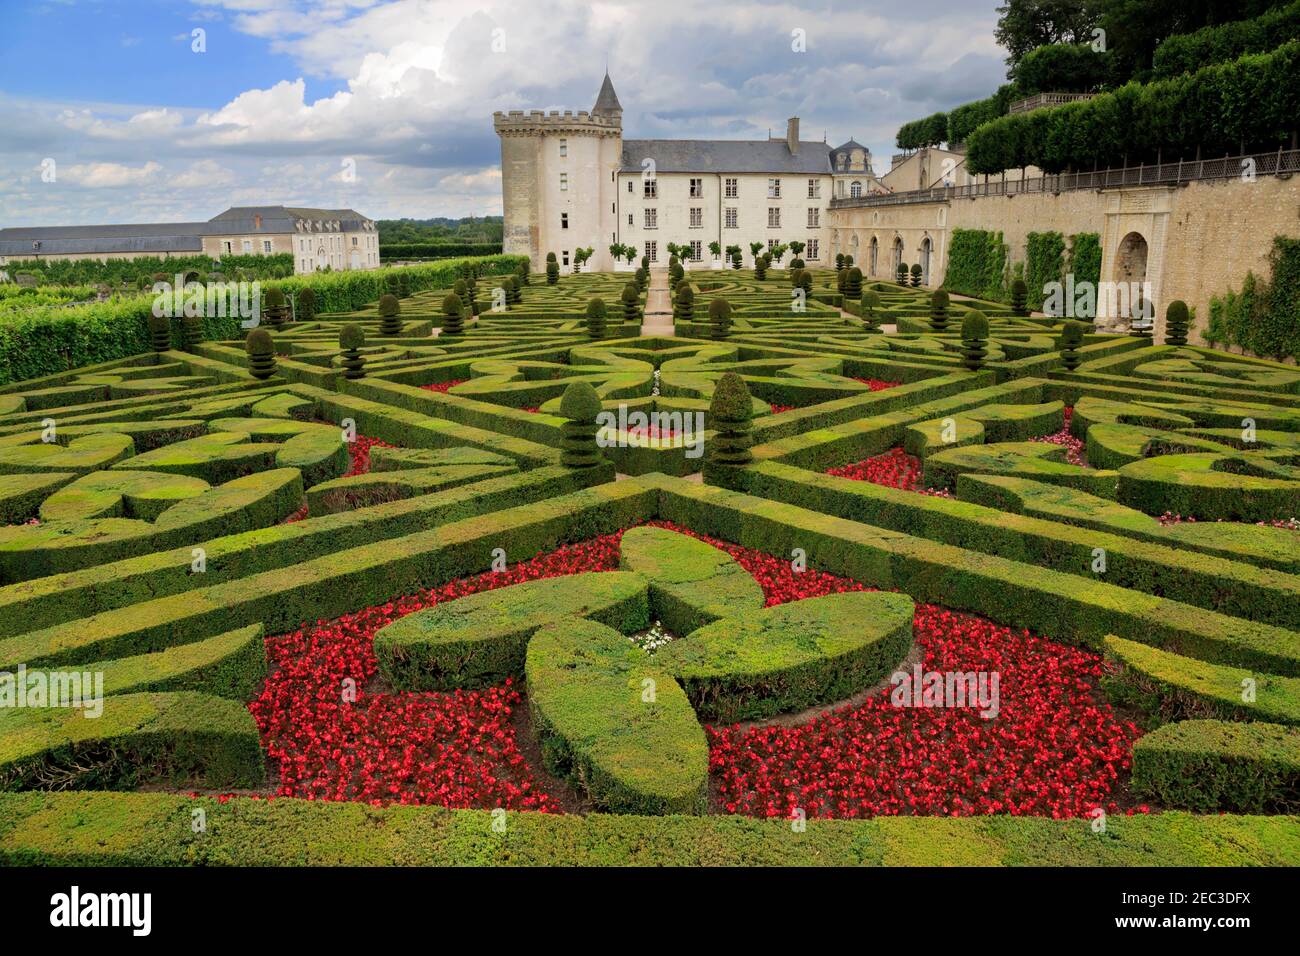 Chateau de Villandry, Loire Valley, France. The late renaissance chateau is most famous for its restored gardens, created from 16th century designs. Stock Photo